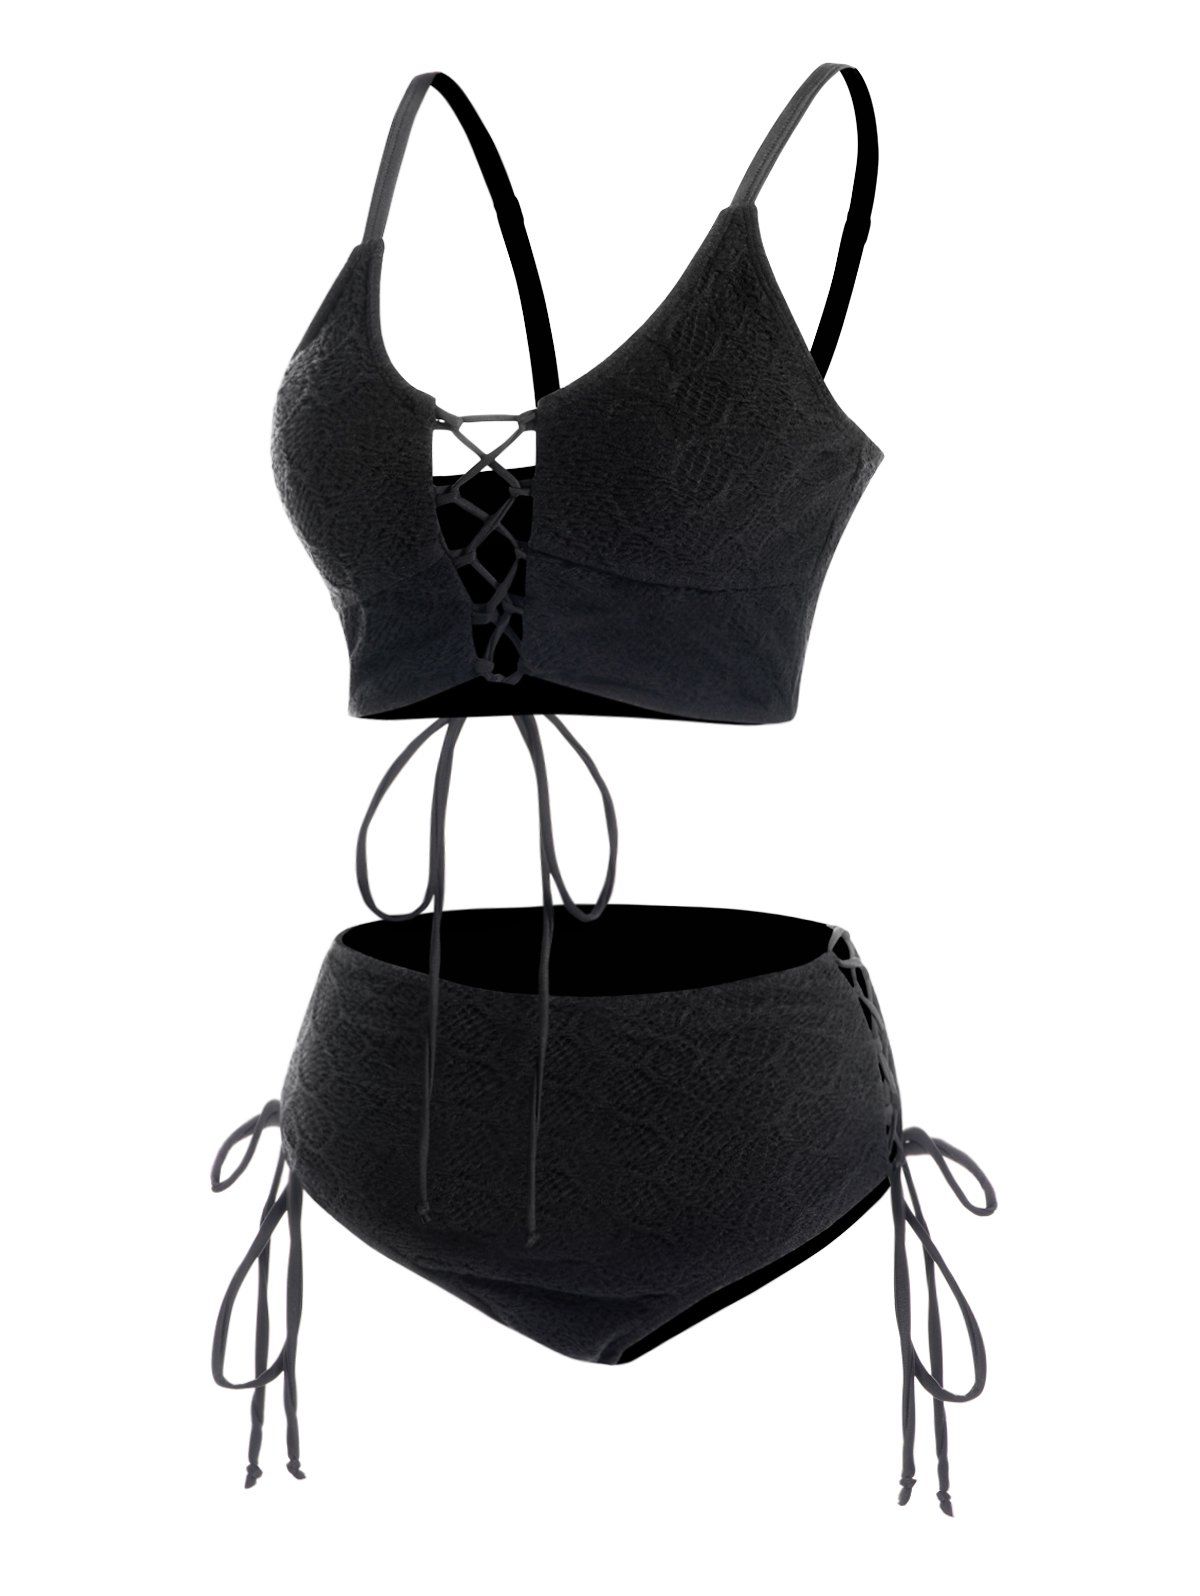 Tummy Control Tankini Swimsuit Plain Color Textured Lace Up Padded High Waisted Swimwear - BLACK S